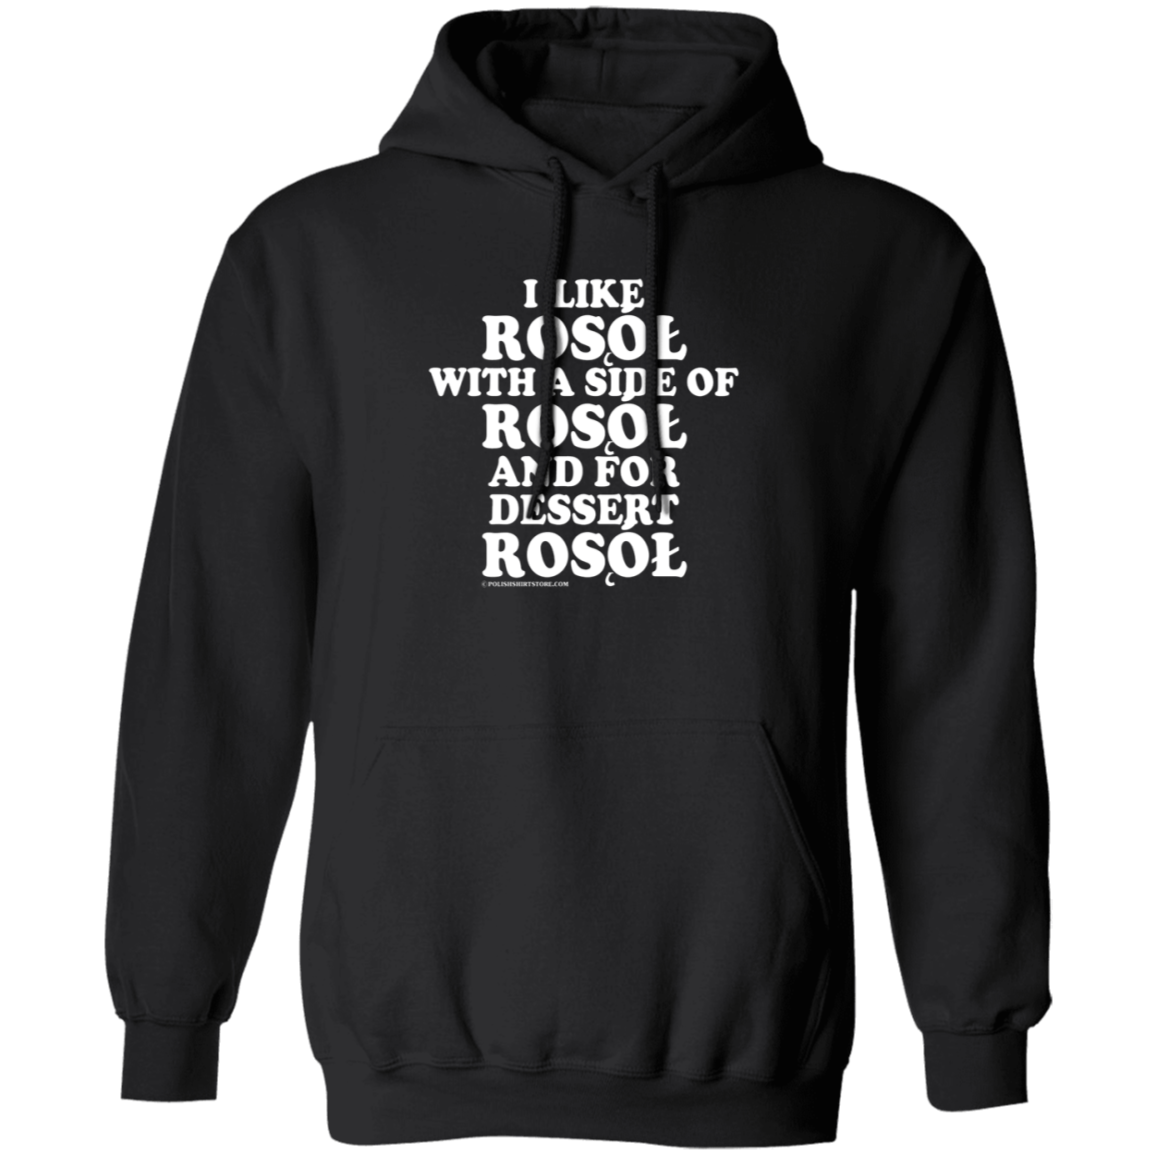 Rosol With A Side Of Rosol Apparel CustomCat G185 Pullover Hoodie Black S